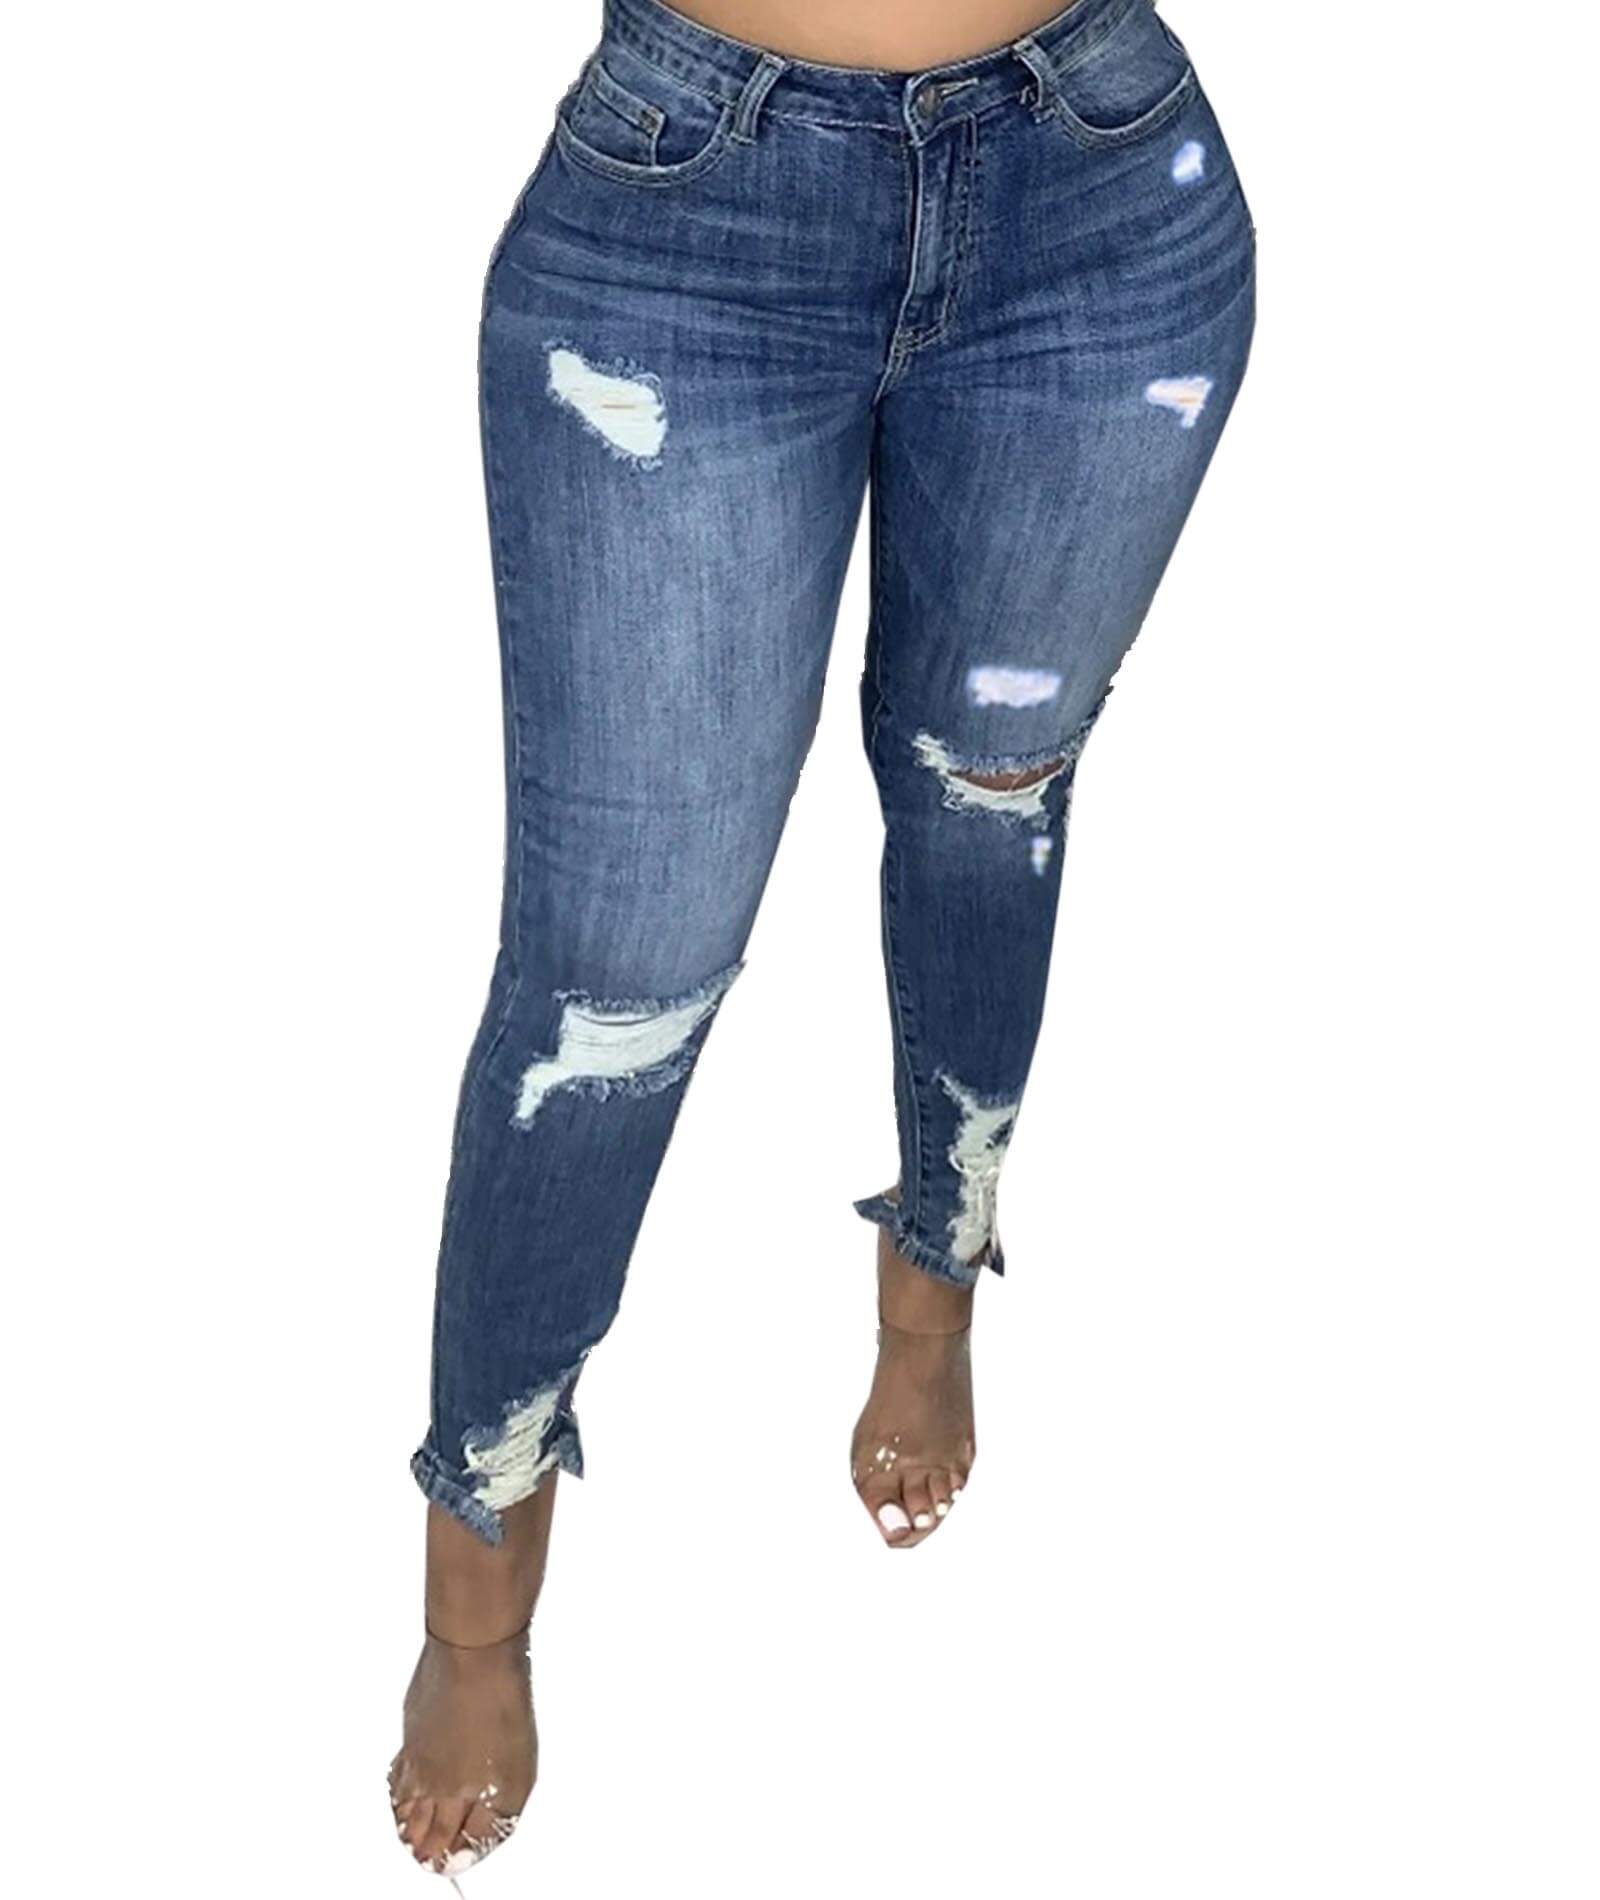  Women's Casual Skinny Distressed Ripped Hole Denim Pants Long Stretch Pencil Jeans